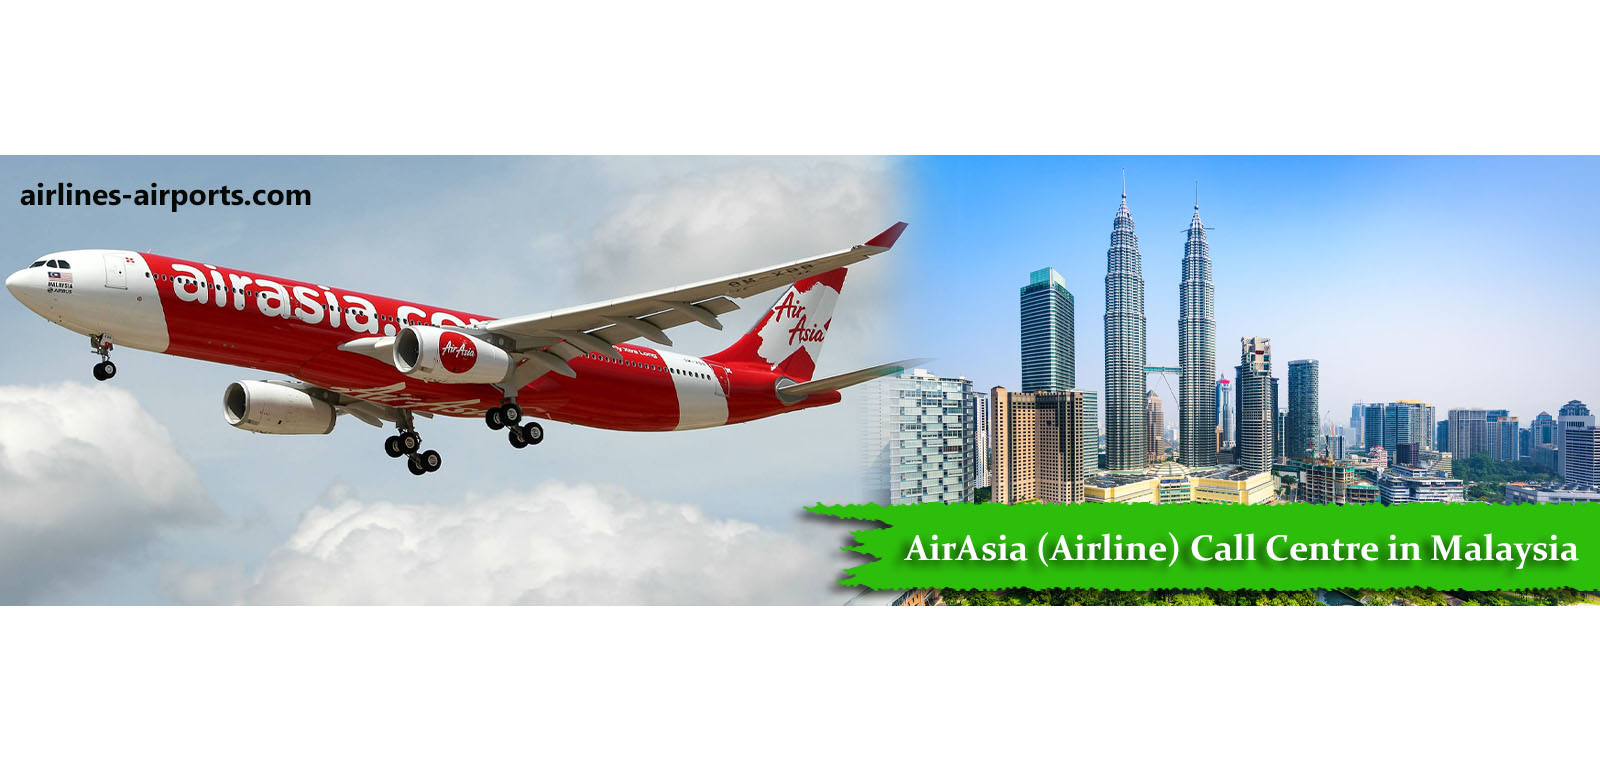 AirAsia (Airline) Call Centre in Malaysia - Airlines-Airports